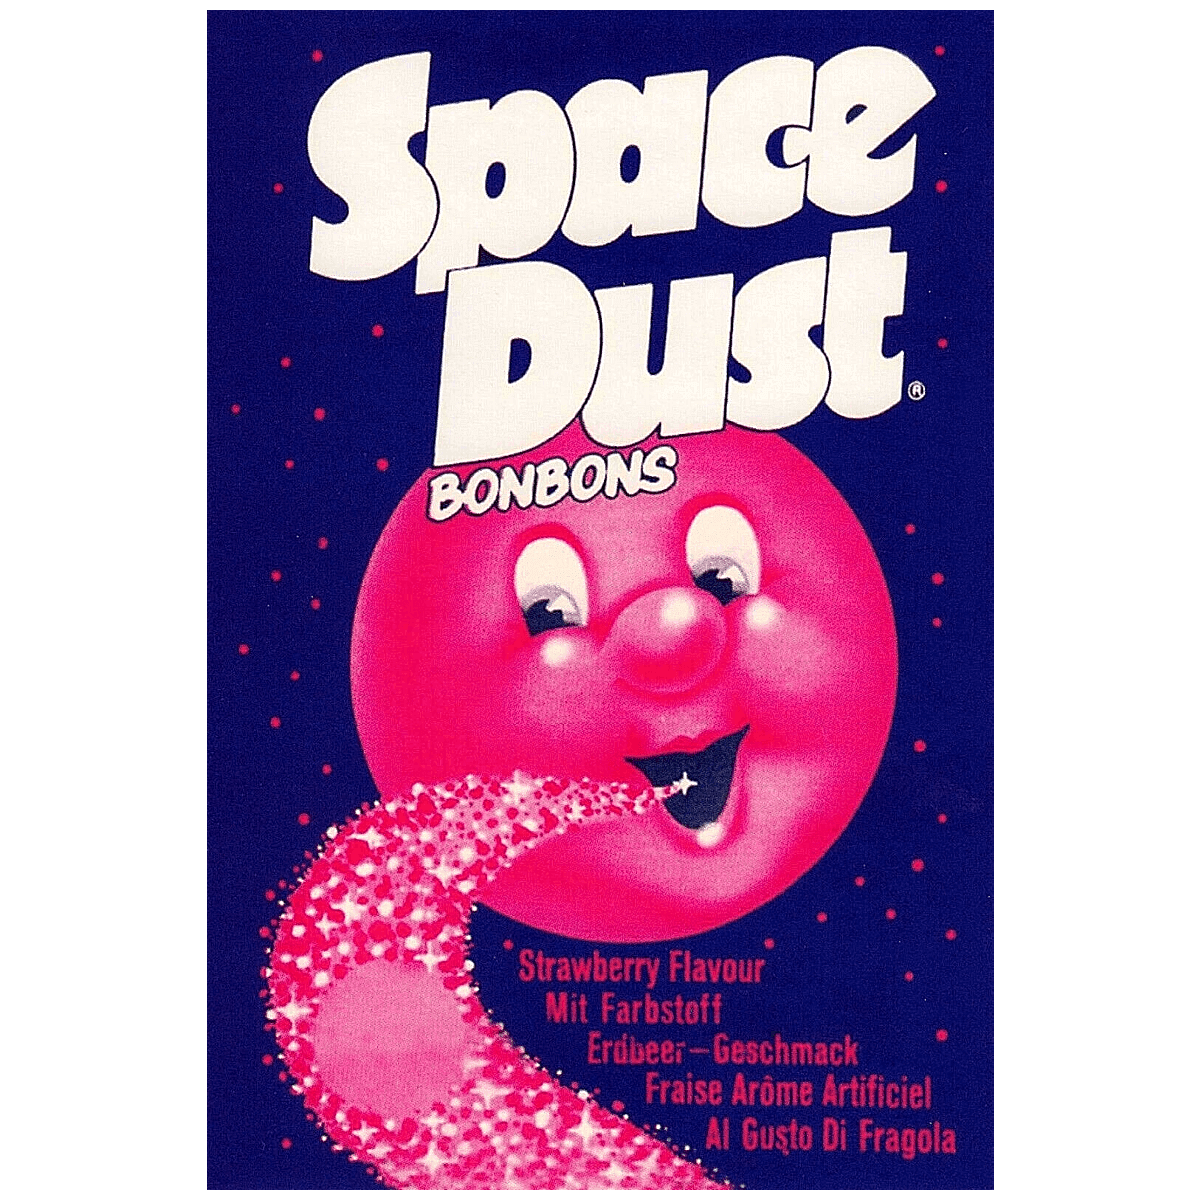 Packet of Space Dust Bonbons strawberry flavour from th 1970s with purple and pink colouring